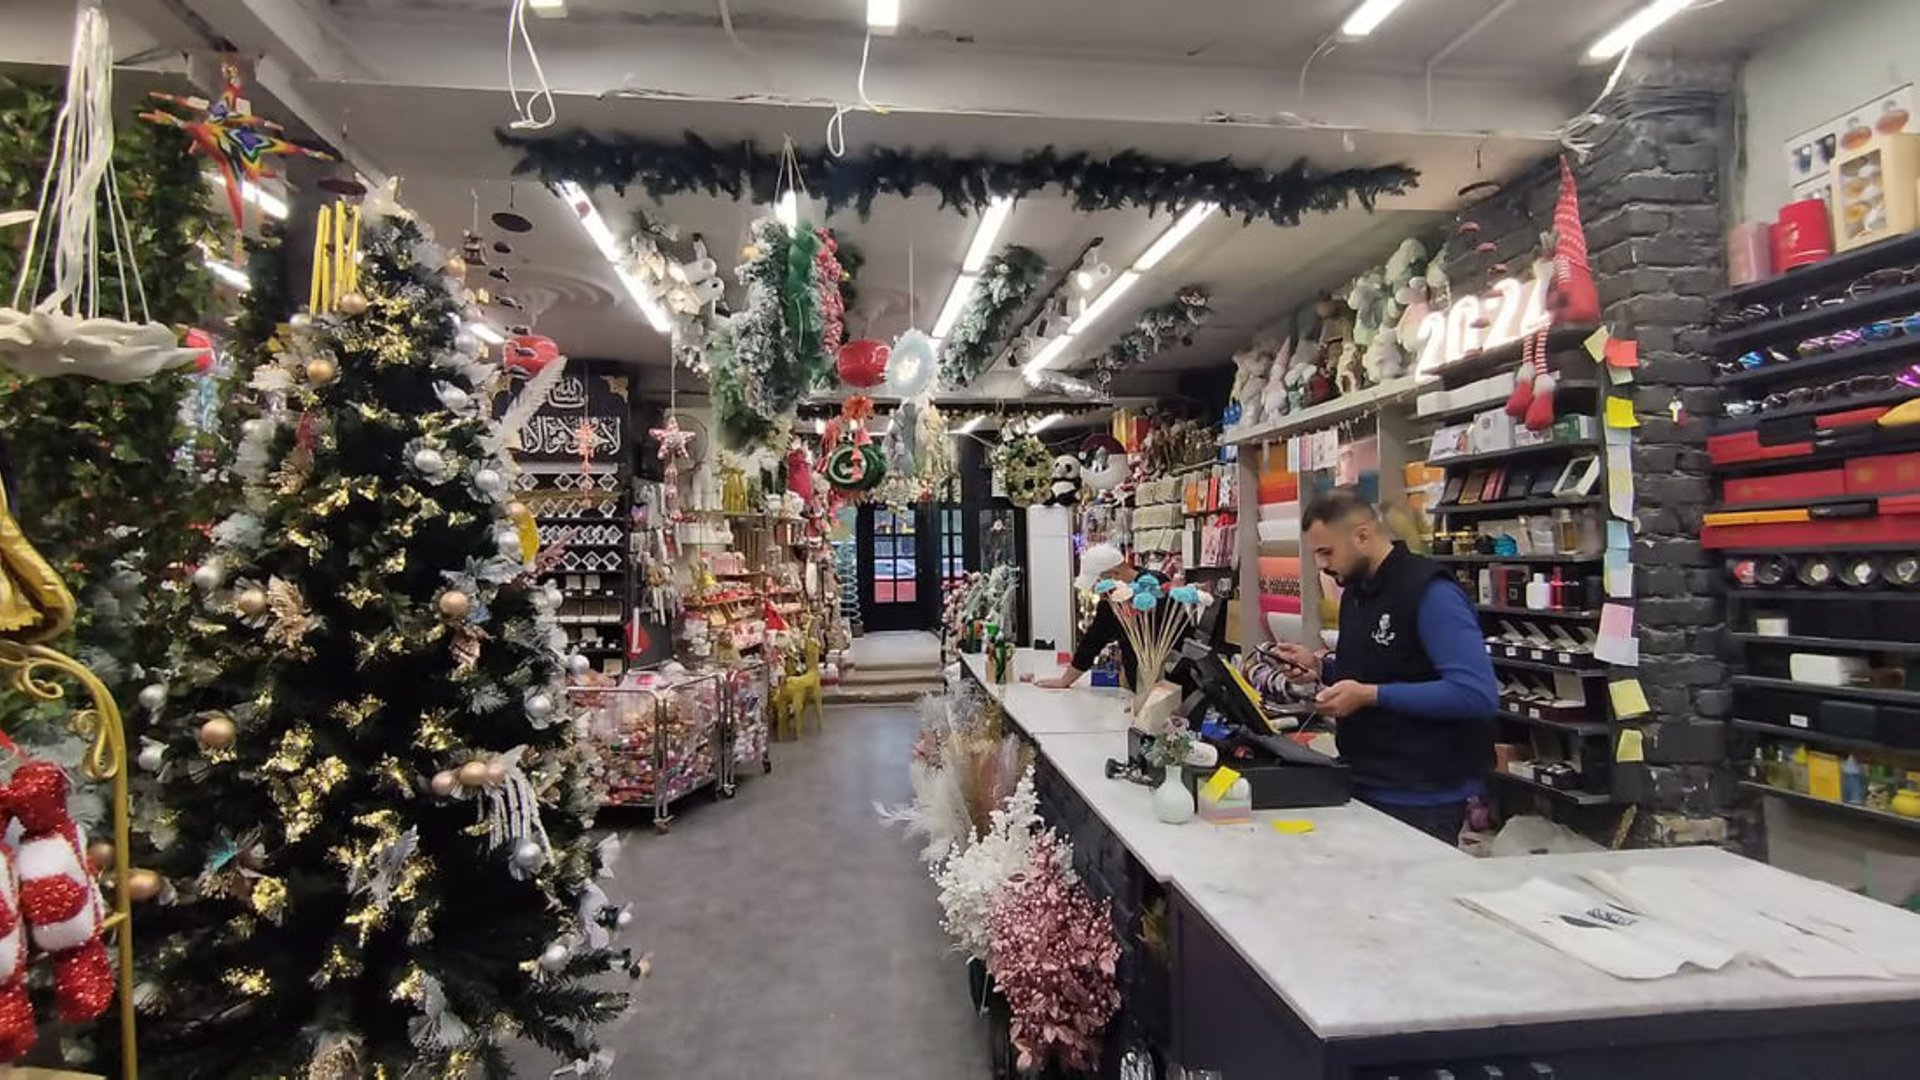 Holiday spirit enlivens Babylons market with decorations and gifts